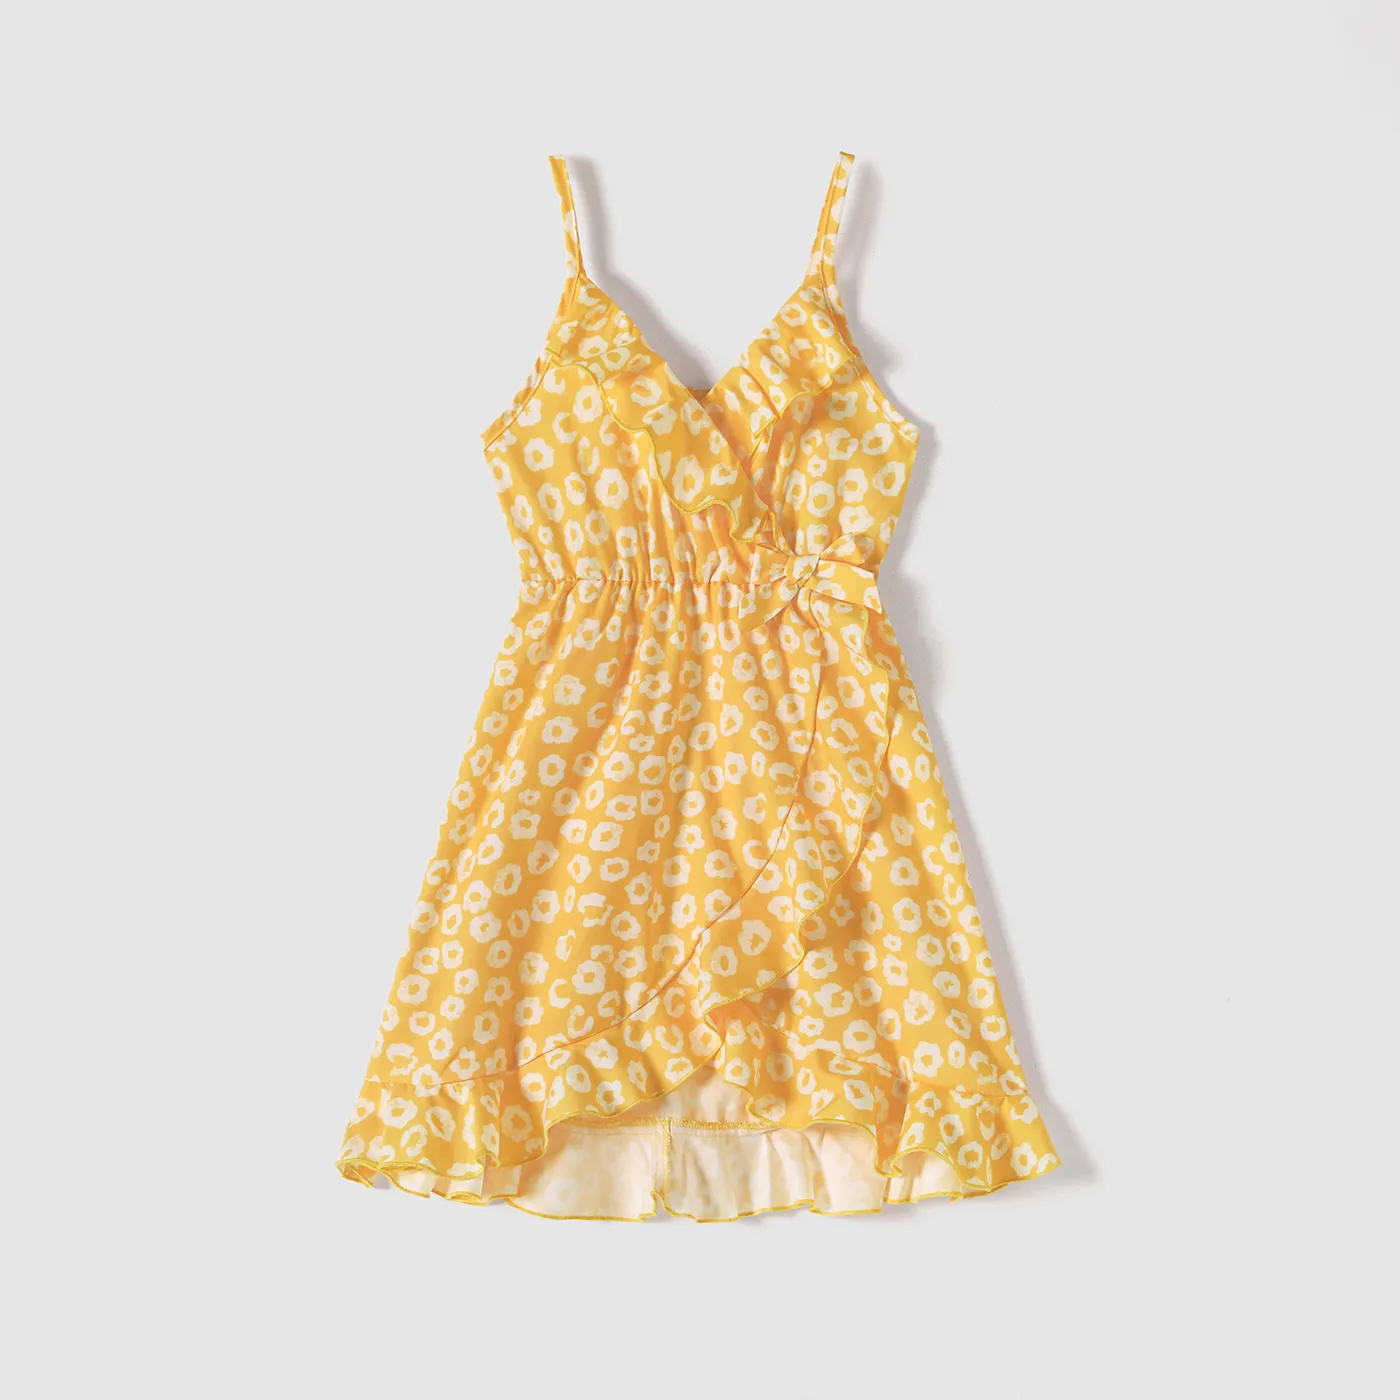 Family Matching Yellow Floral Print Surplice Neck Ruffle Trim Wrap Cami Dresses And Colorblock Short-sleeve T-shirts Sets